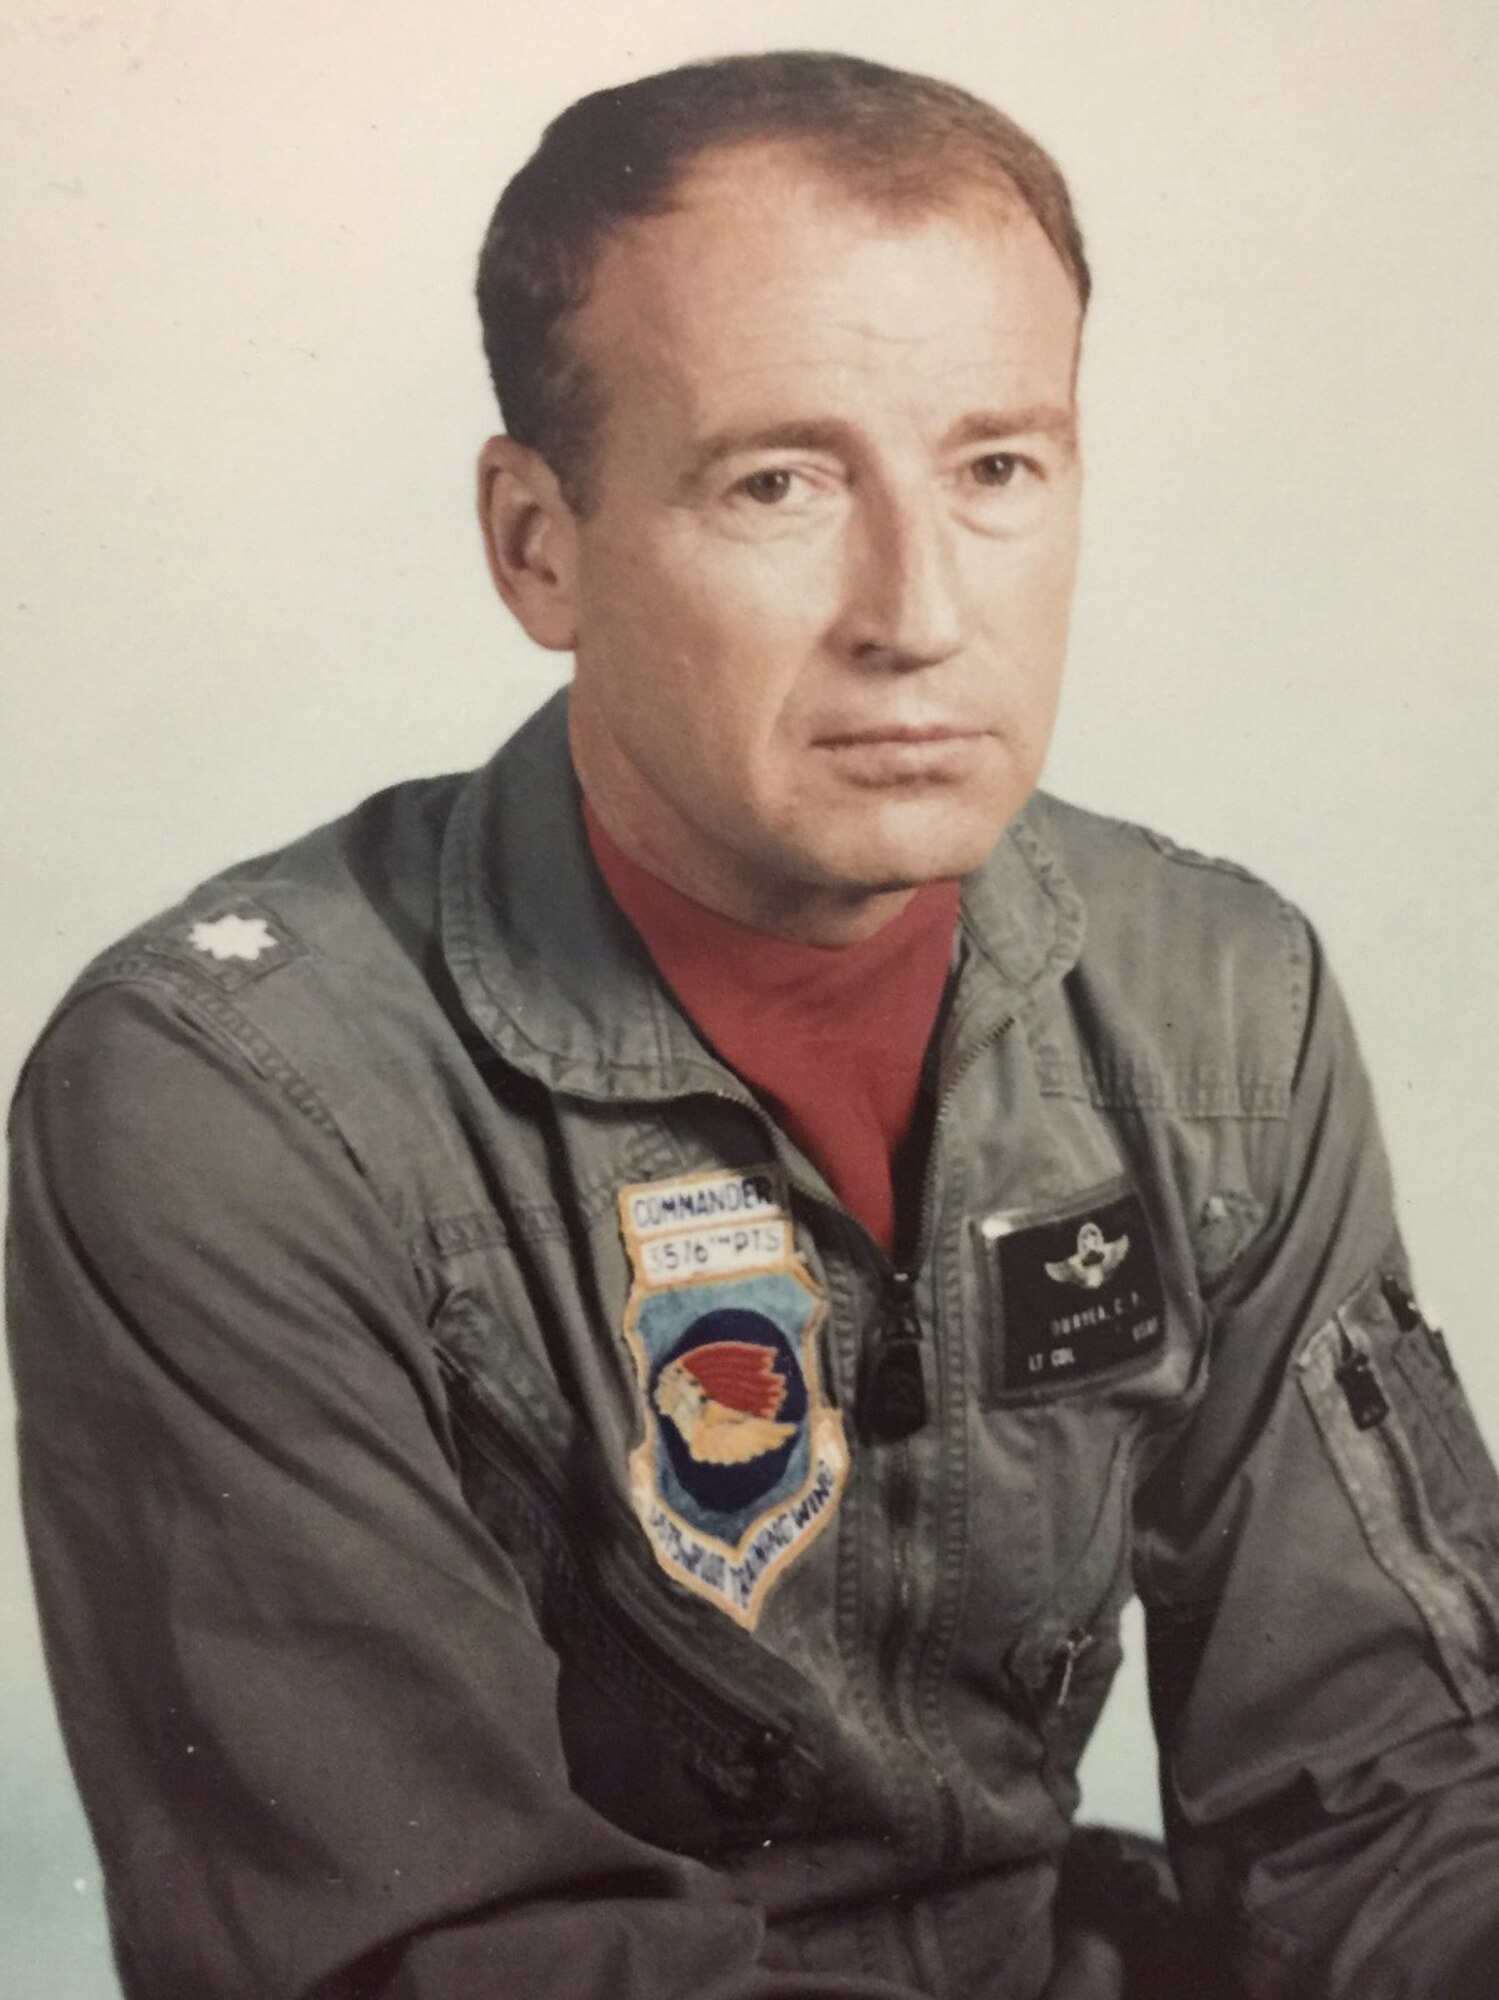 Col. Cecil Duryea, 3576th Pilot Training Squadron Commander, poses for a photo. Duryea served 30 years in the Air Force as a bomber and fighter pilot. (U.S. Air Force courtesy photo)